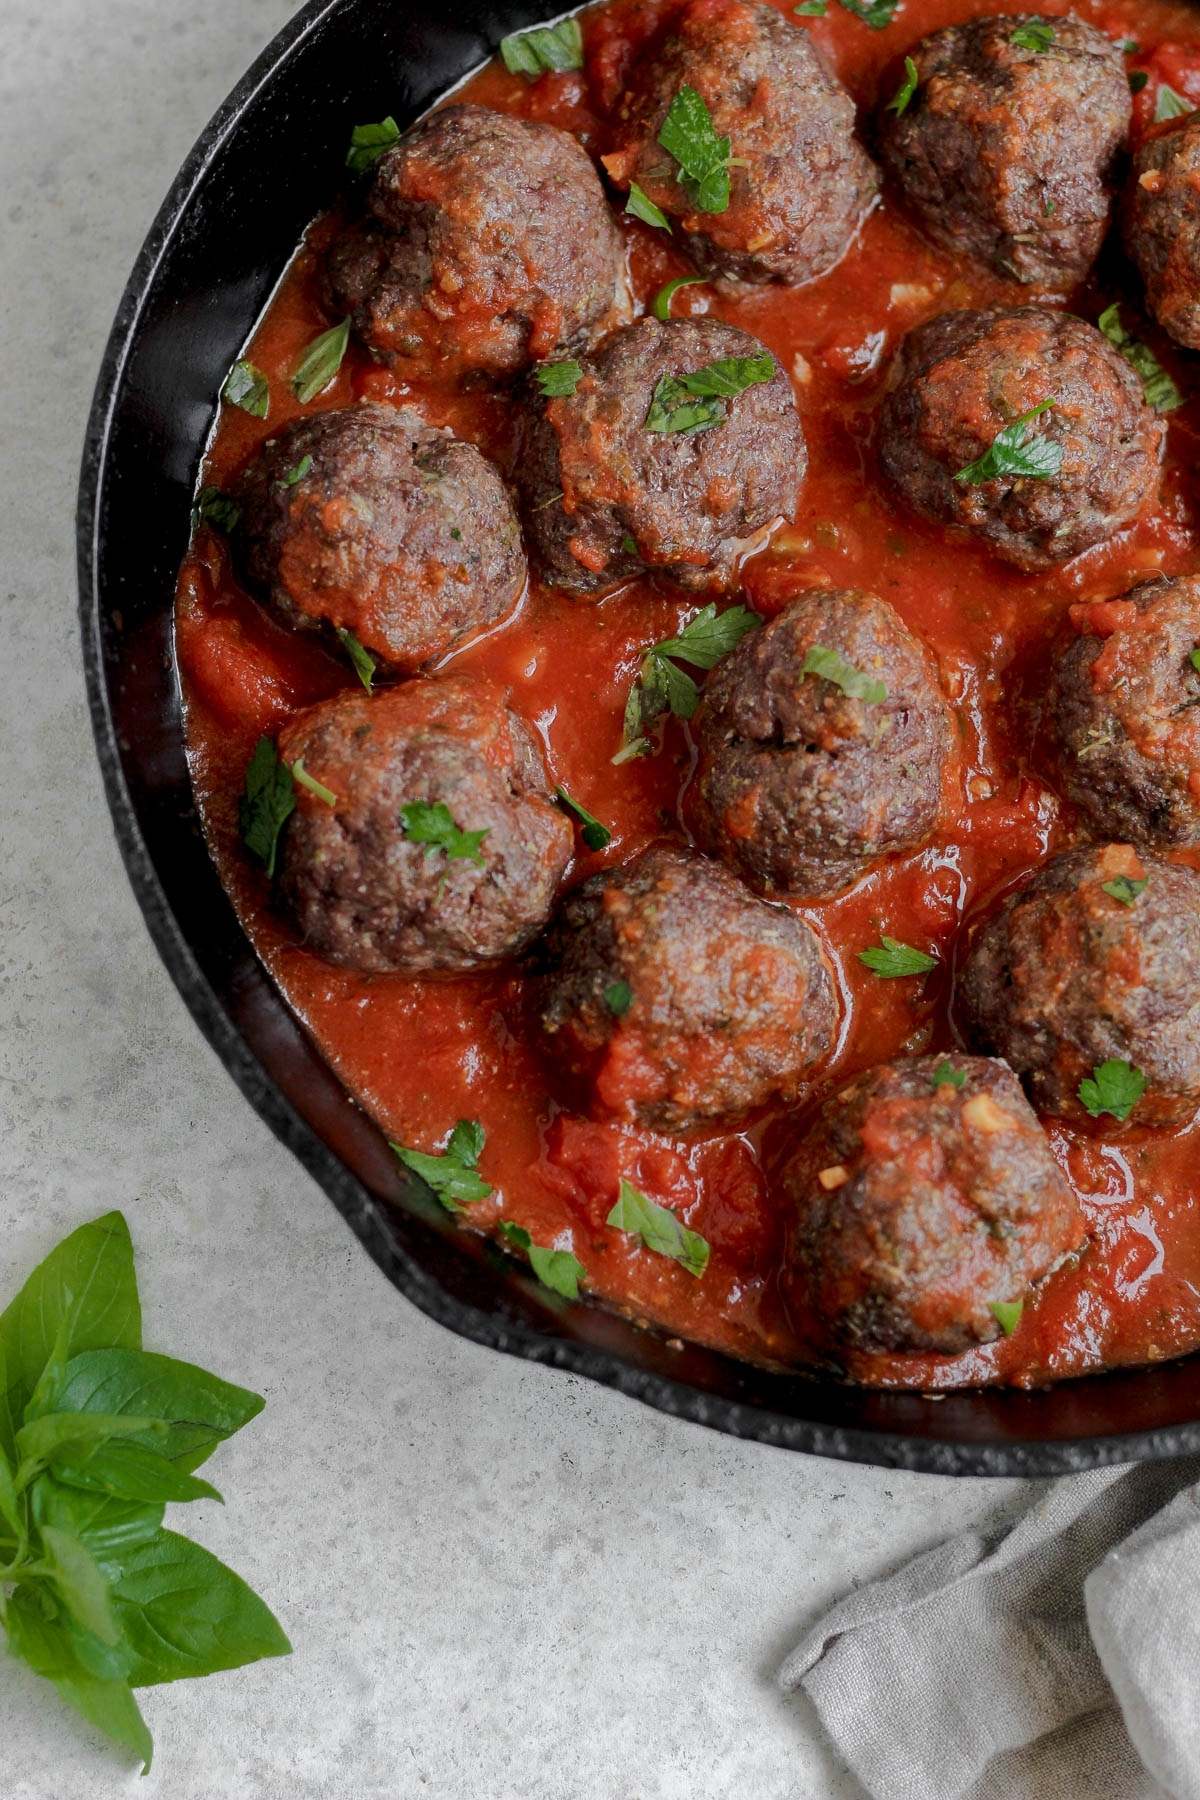 A cast iron skillet filled with sauce and bison meatballs.